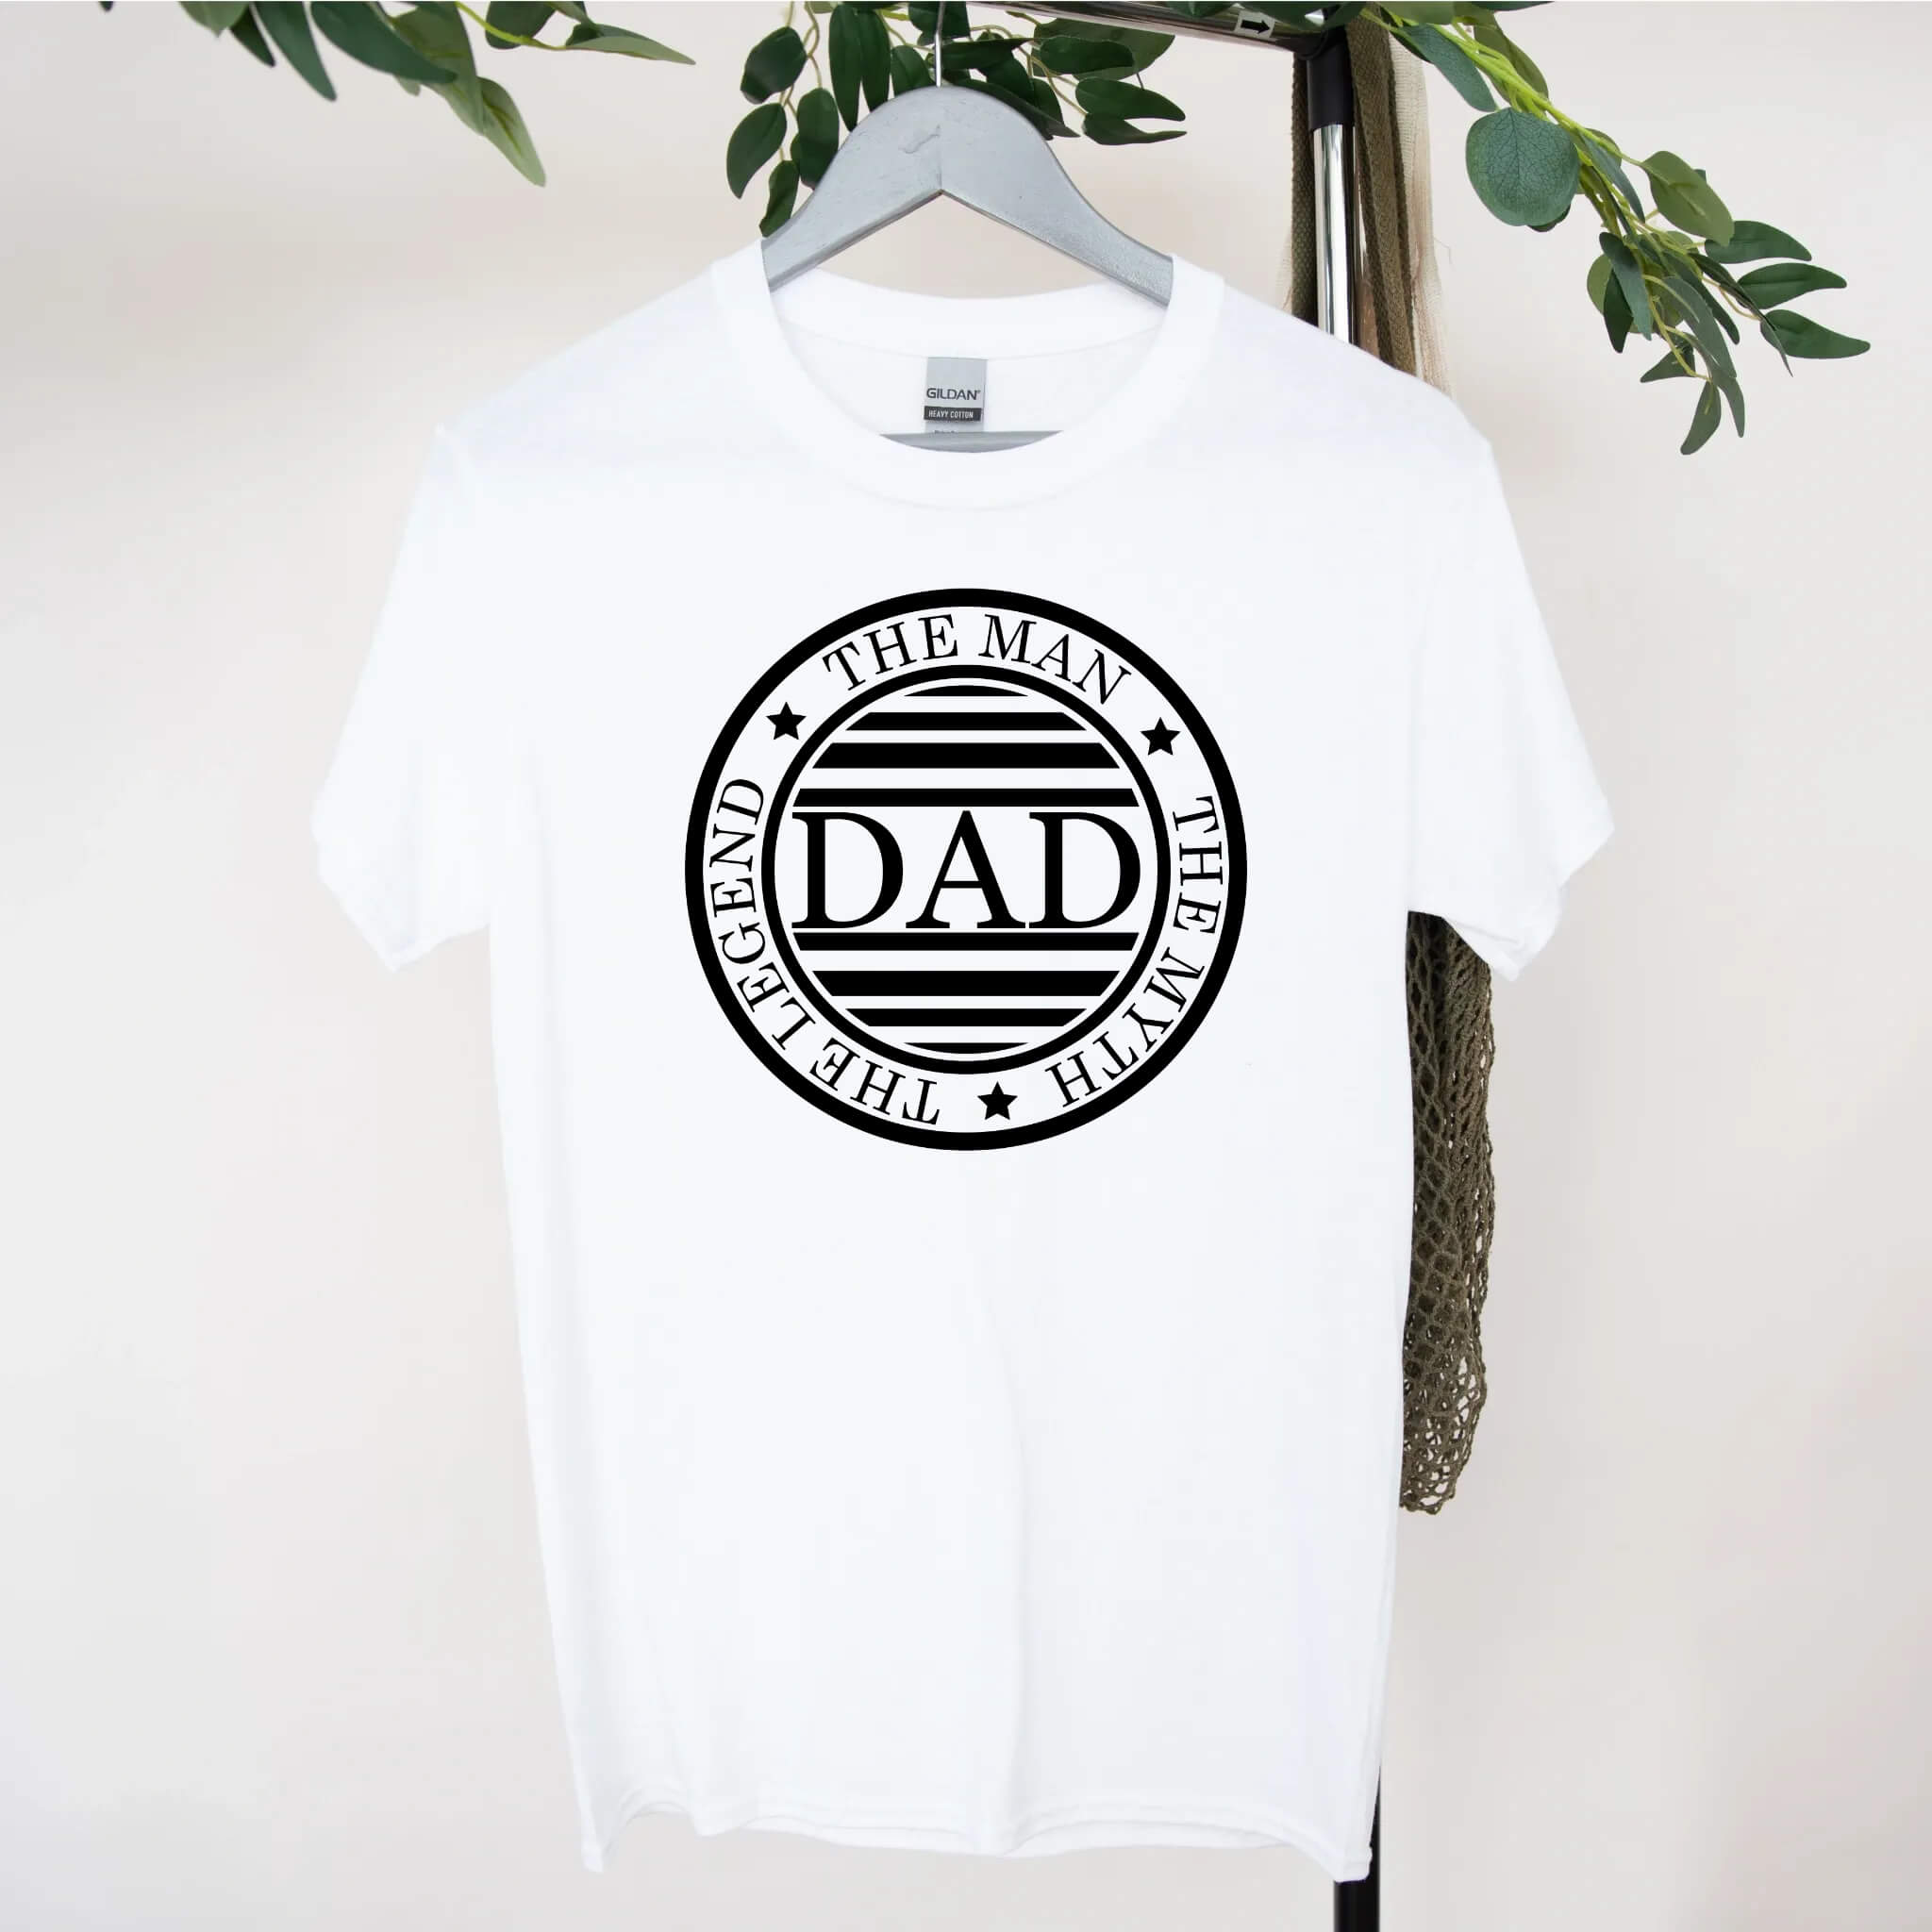 Dad The Man The Myth The Legend T-Shirt Classic Birthday Christmas Father's Day Husband Gift